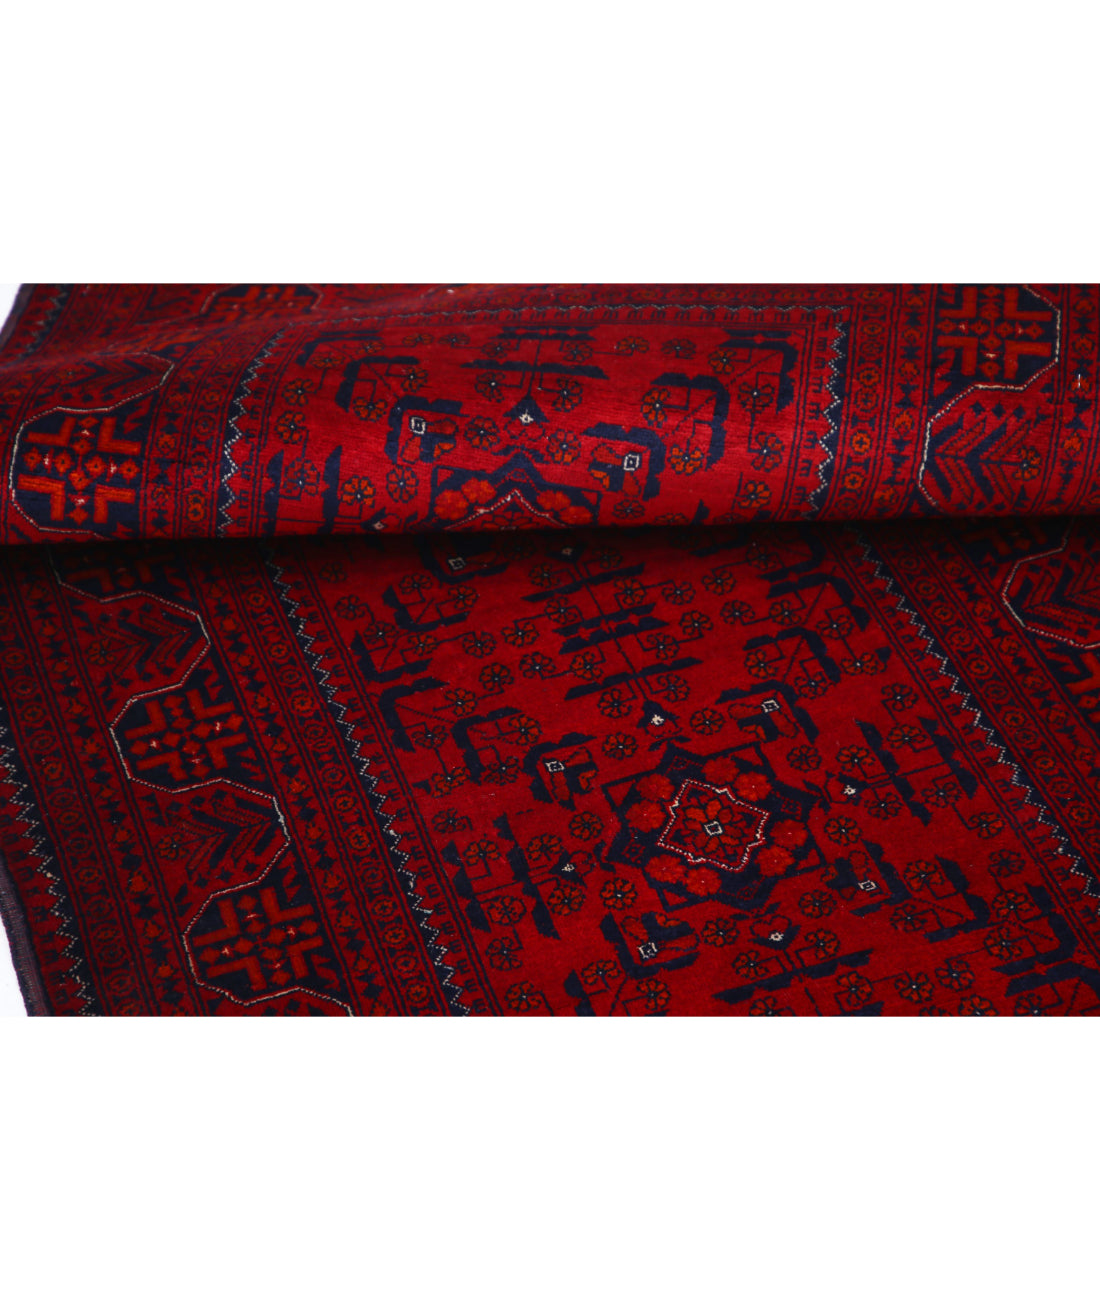 Afghan 2'8'' X 6'3'' Hand-Knotted Wool Rug 2'8'' x 6'3'' (80 X 188) / Red / Red